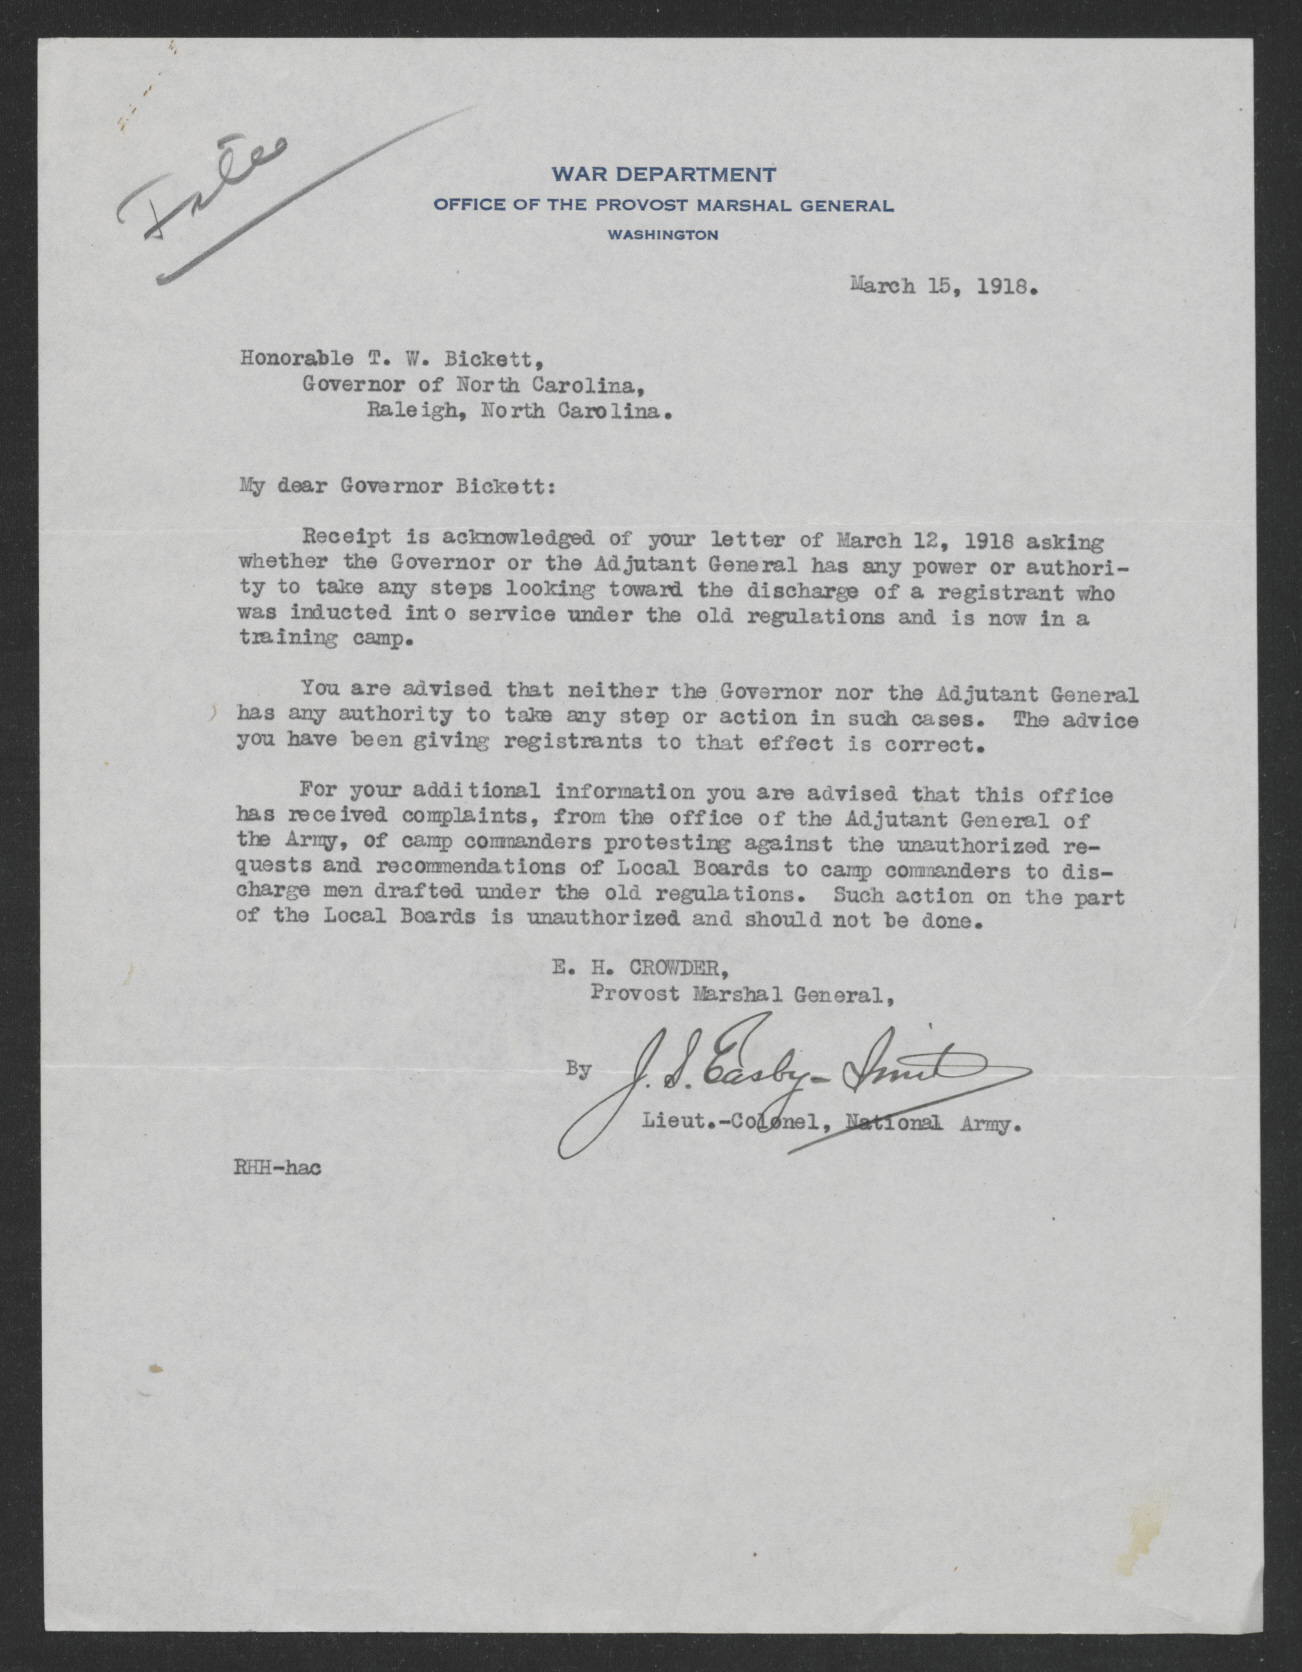 Letter from Enoch H. Crowder and James S. Easby-Smith to Thomas W. Bickett, March 15, 1918